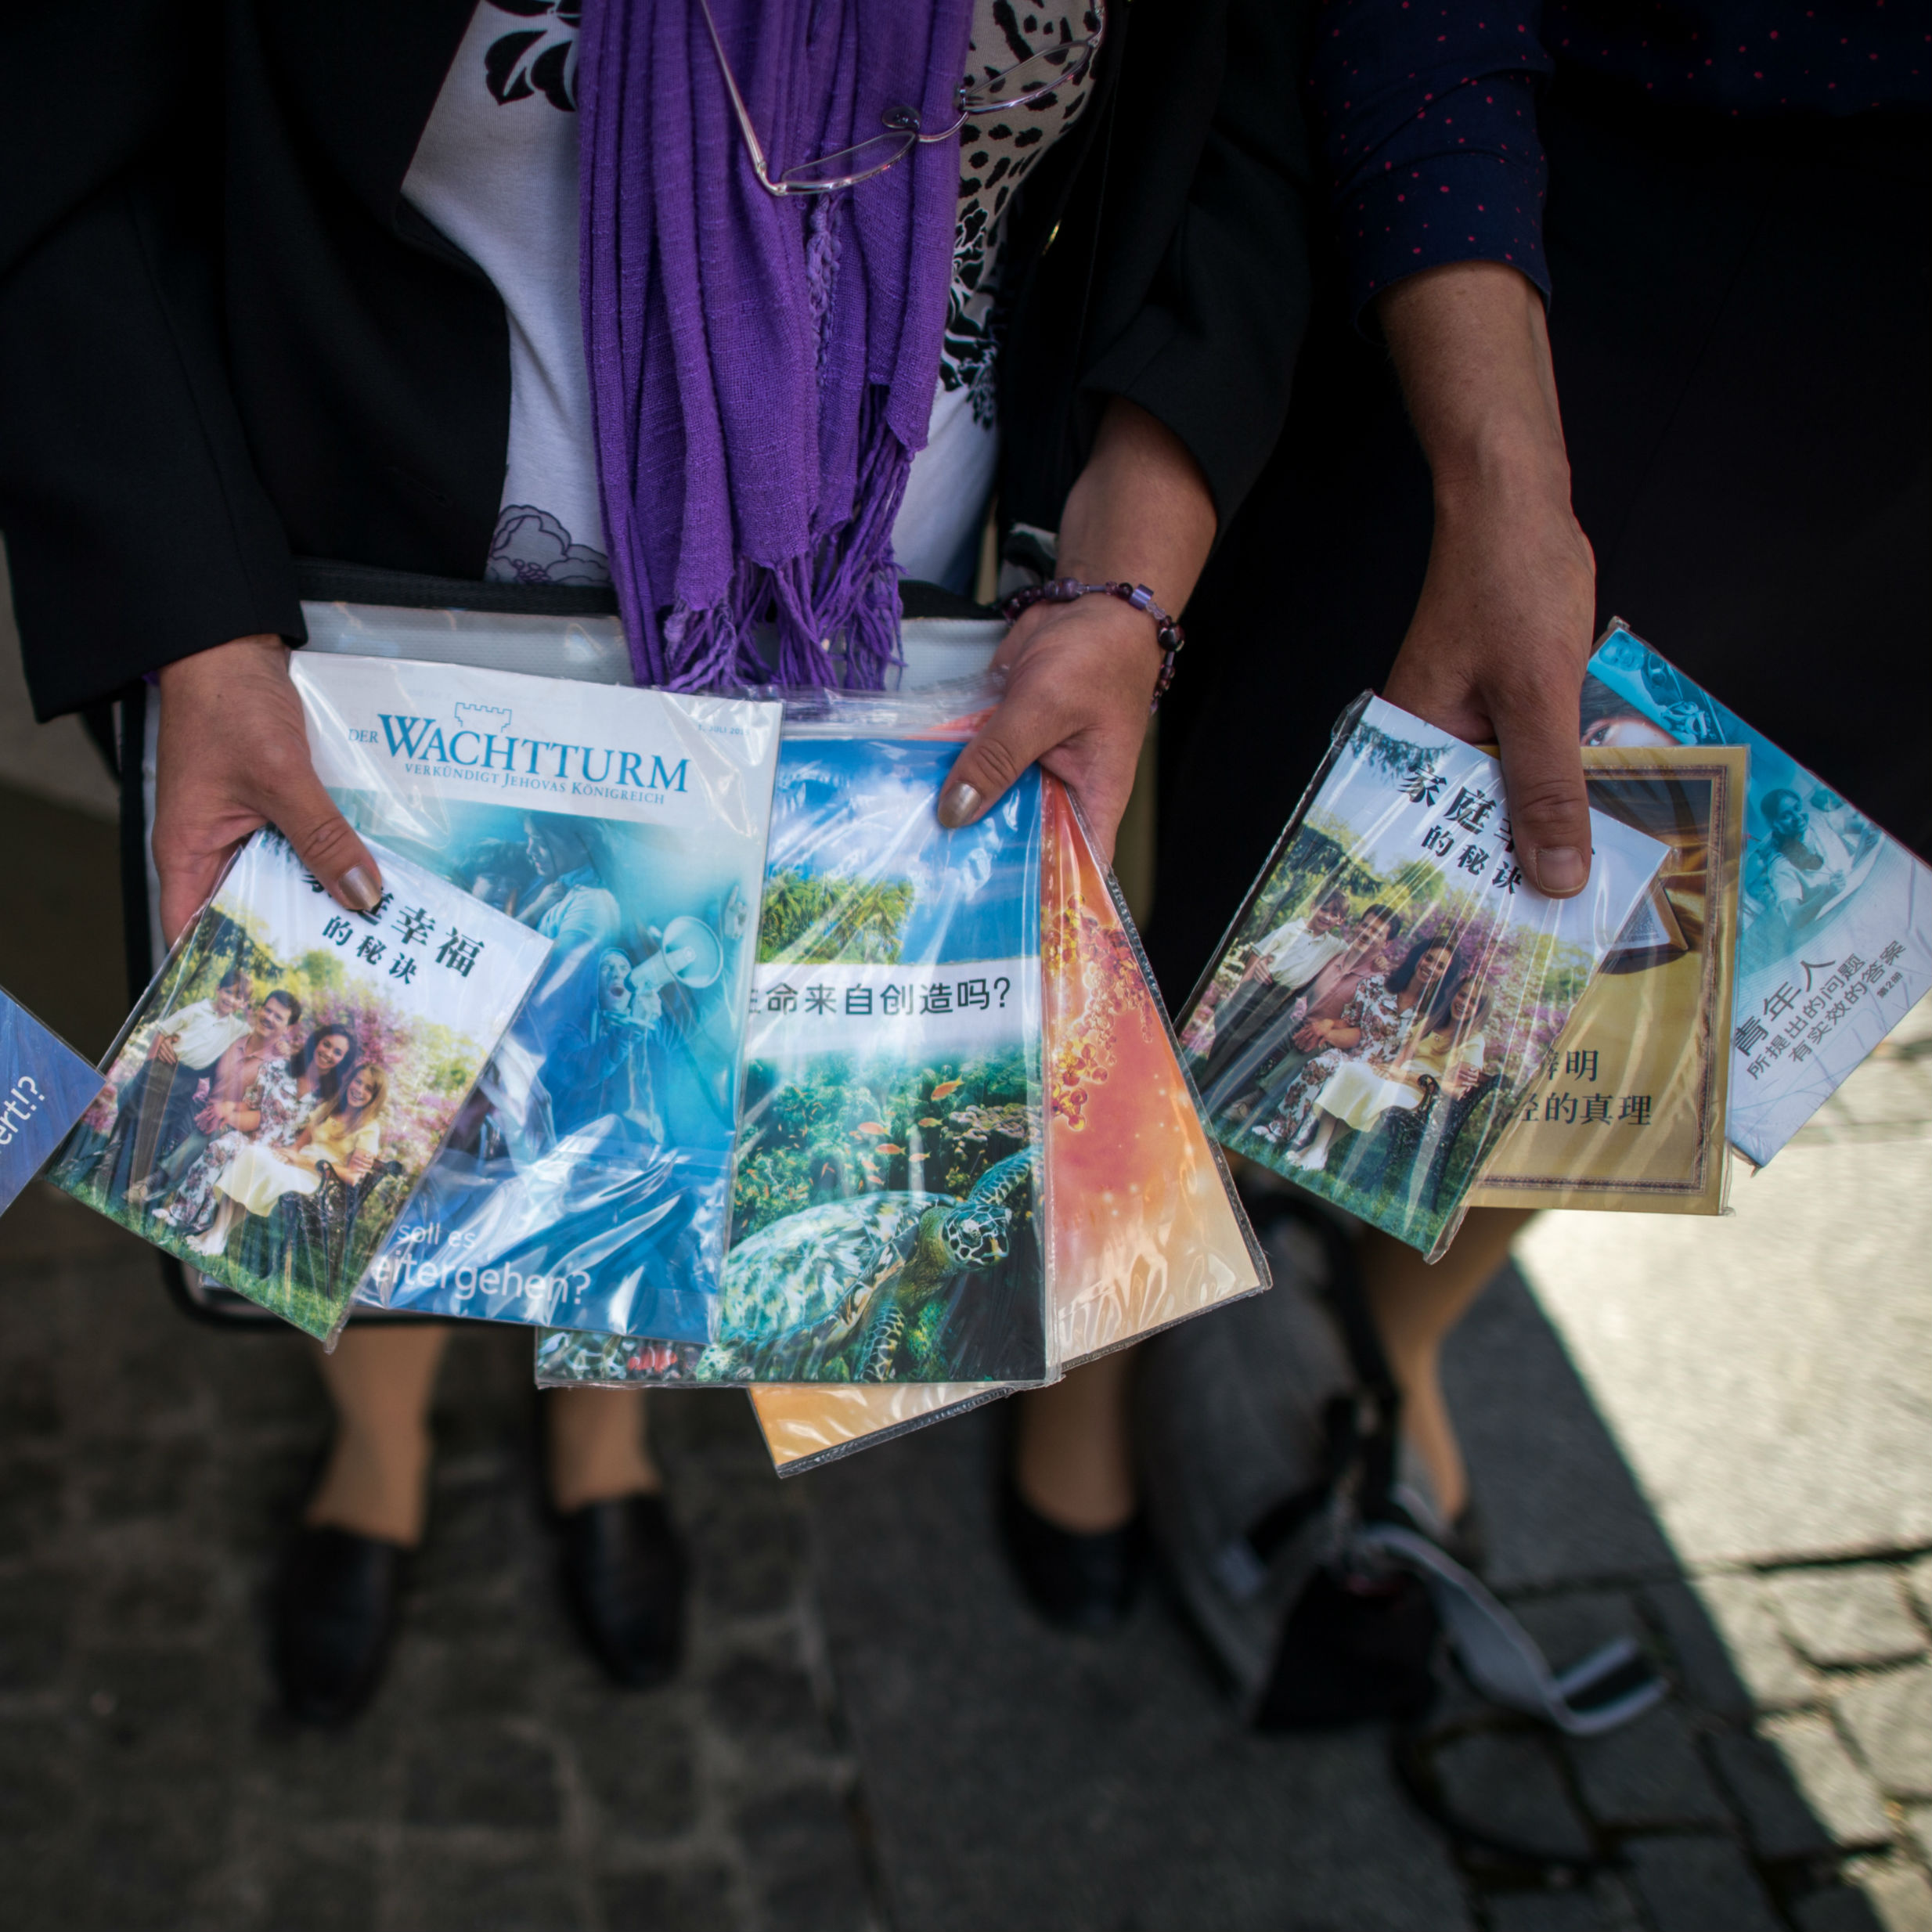 Jehovah's Witnesses target Muslim refugees in Germany